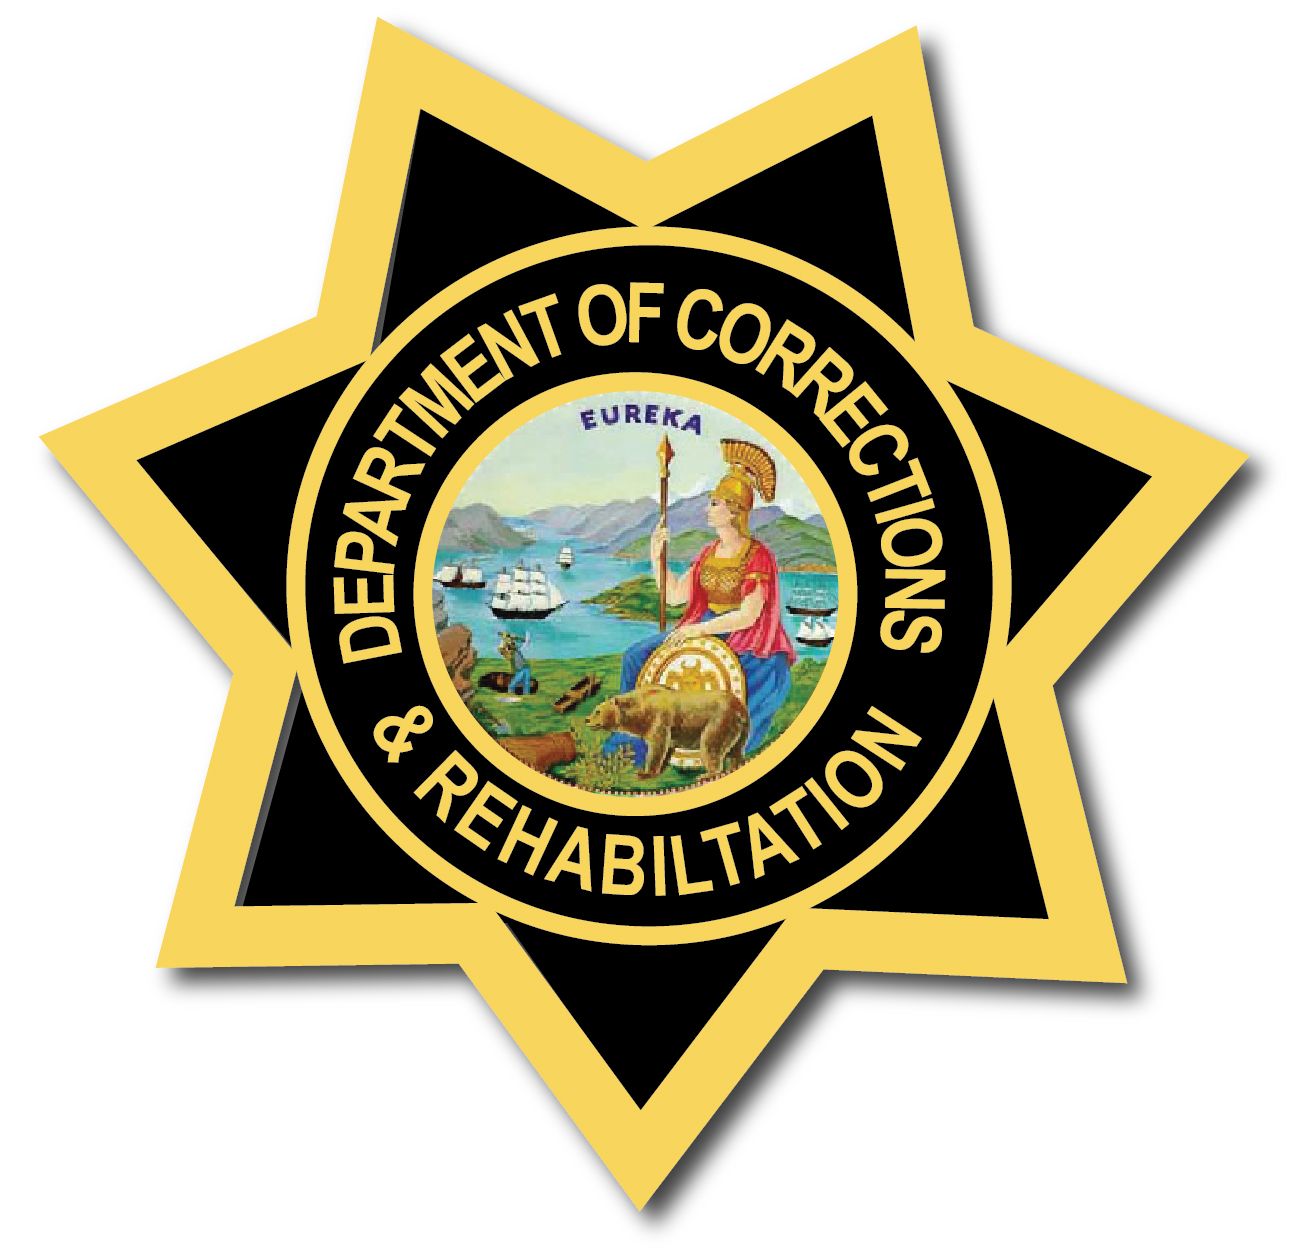 PP-1762 - Carved  Wall Plaque of the Star Badge of theCalifornia Department of Corrections and Rehabilitation (State Prisons), Artist Painted